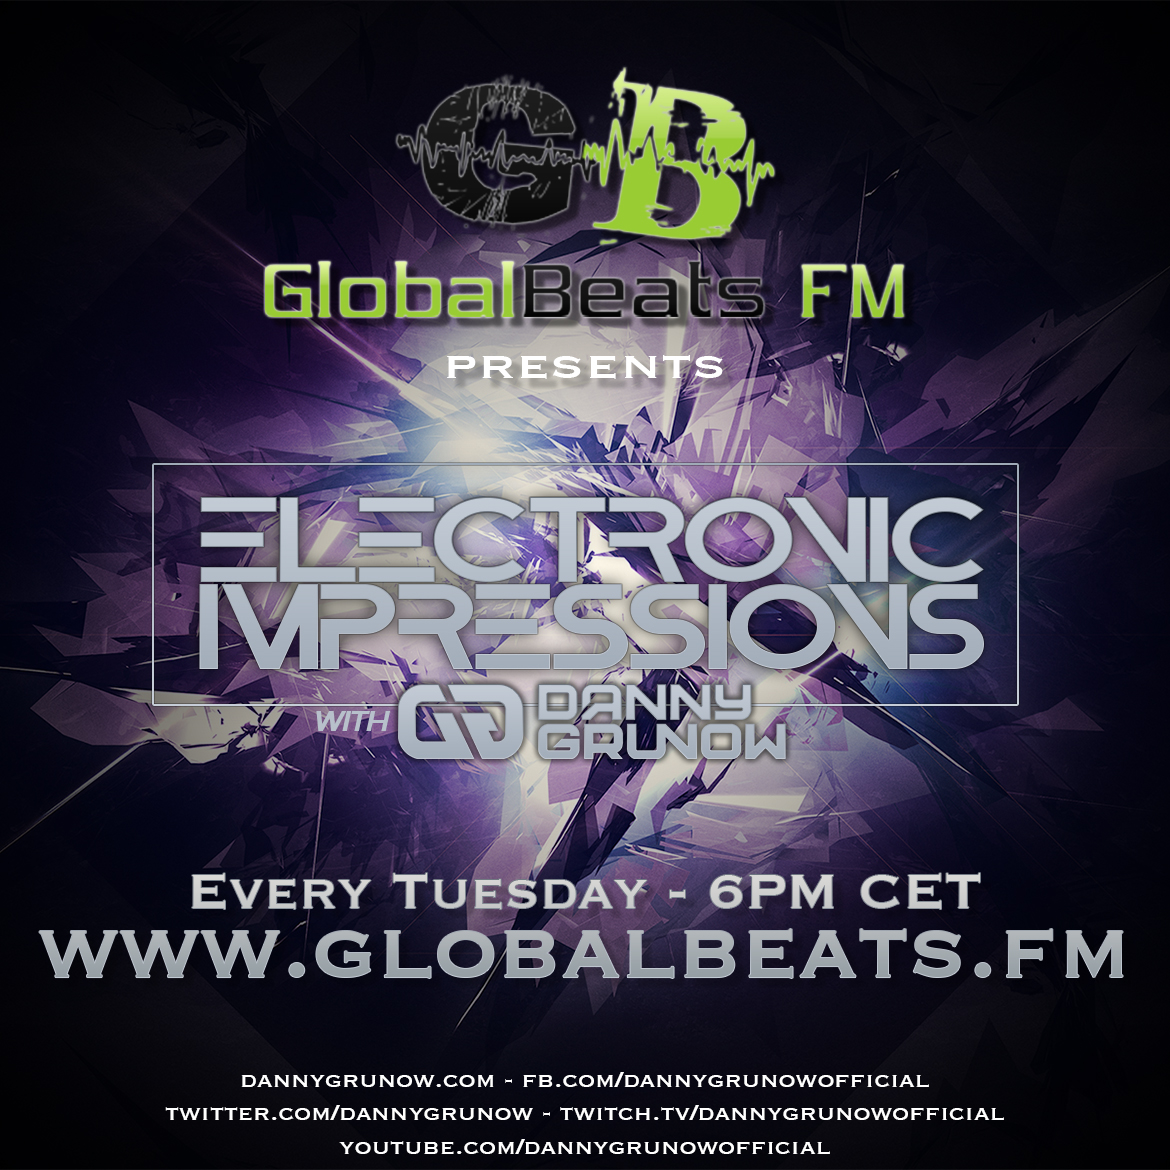 Now live on GlobalBeats.FM

Electronic Impressions 859 with Danny Grunow

Tune in and enjoy the music.

#Trance #Trancelovers #Trancefamily #UpliftingTrance #VocalTrance #TechTrance #Radioshow #Podcast